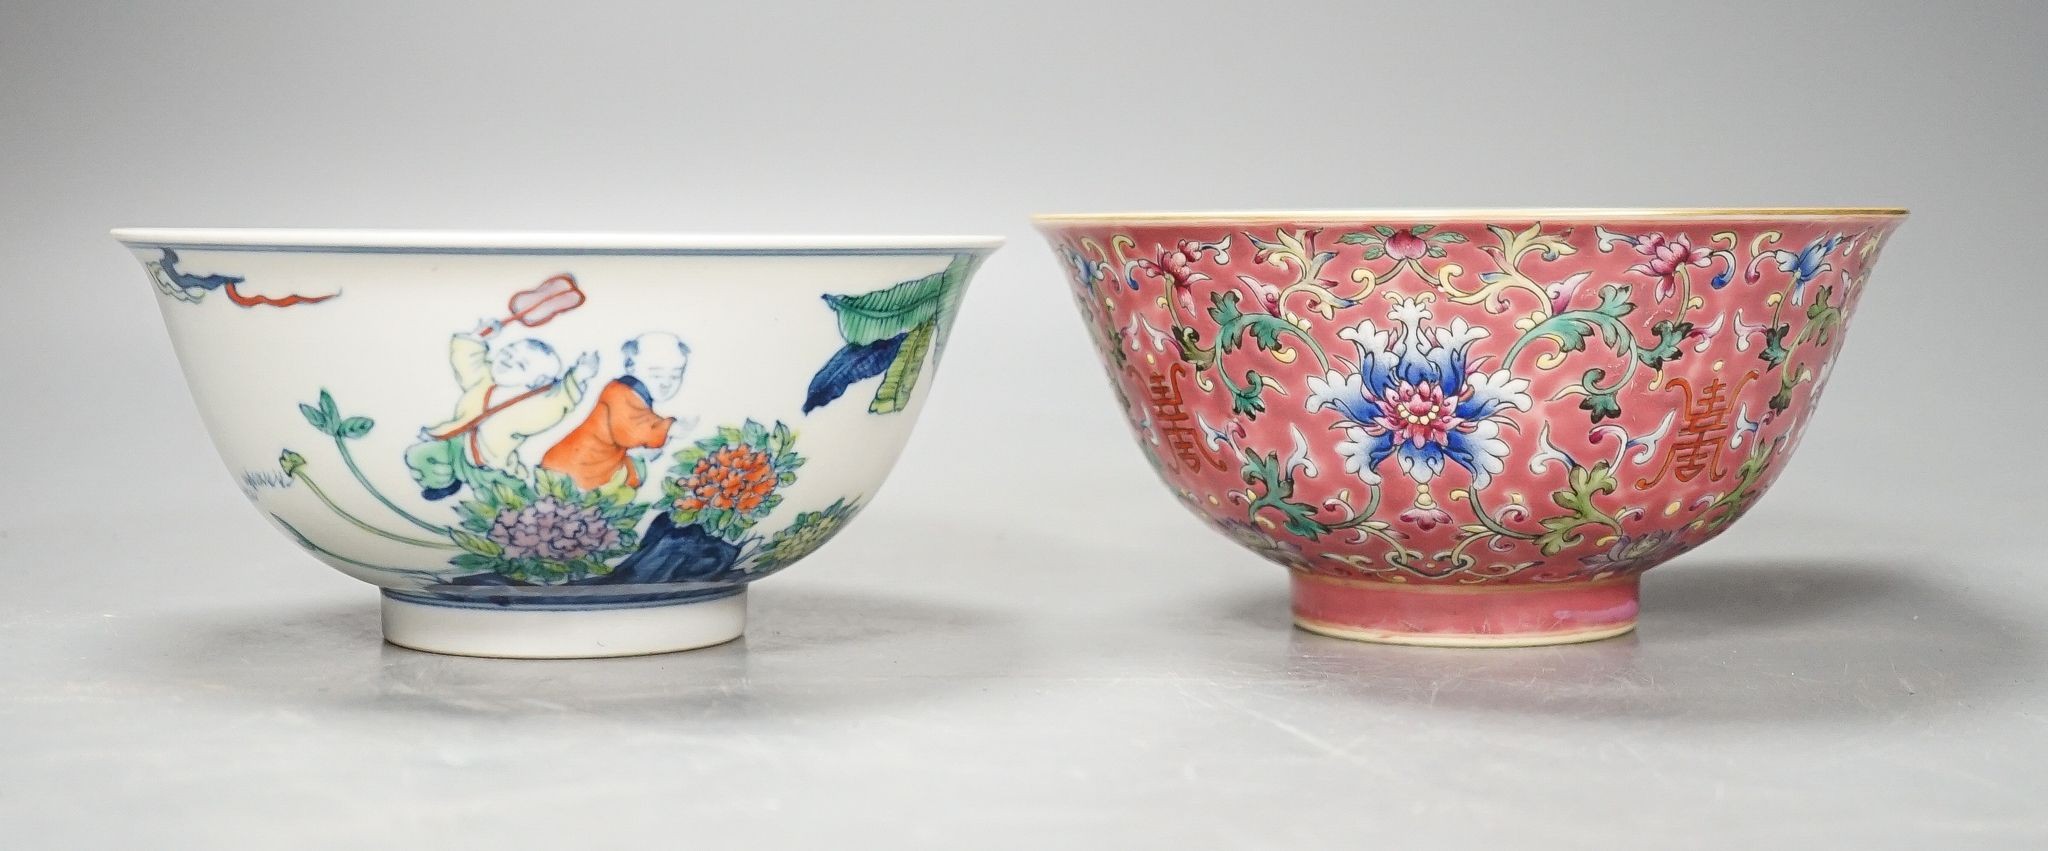 Two Chinese porcelain bowls, largest 15cm diameter